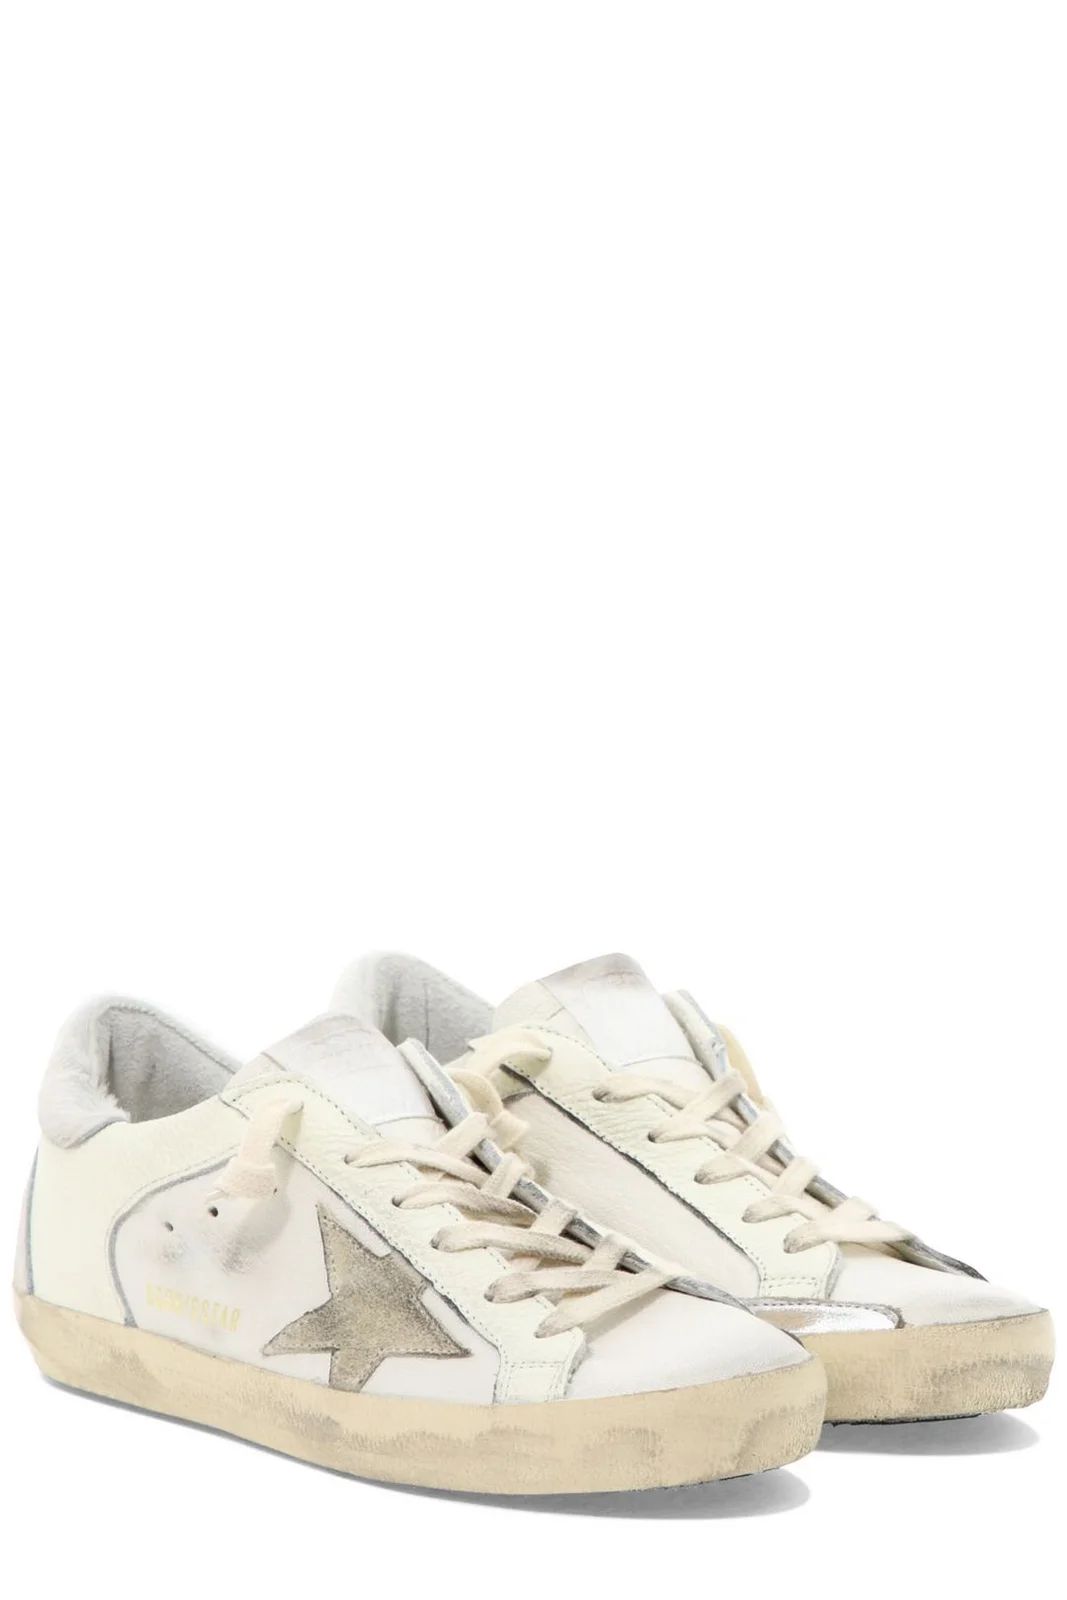 Golden Goose Deluxe Brand Superstar Lace-Up Sneakers | Cettire Global